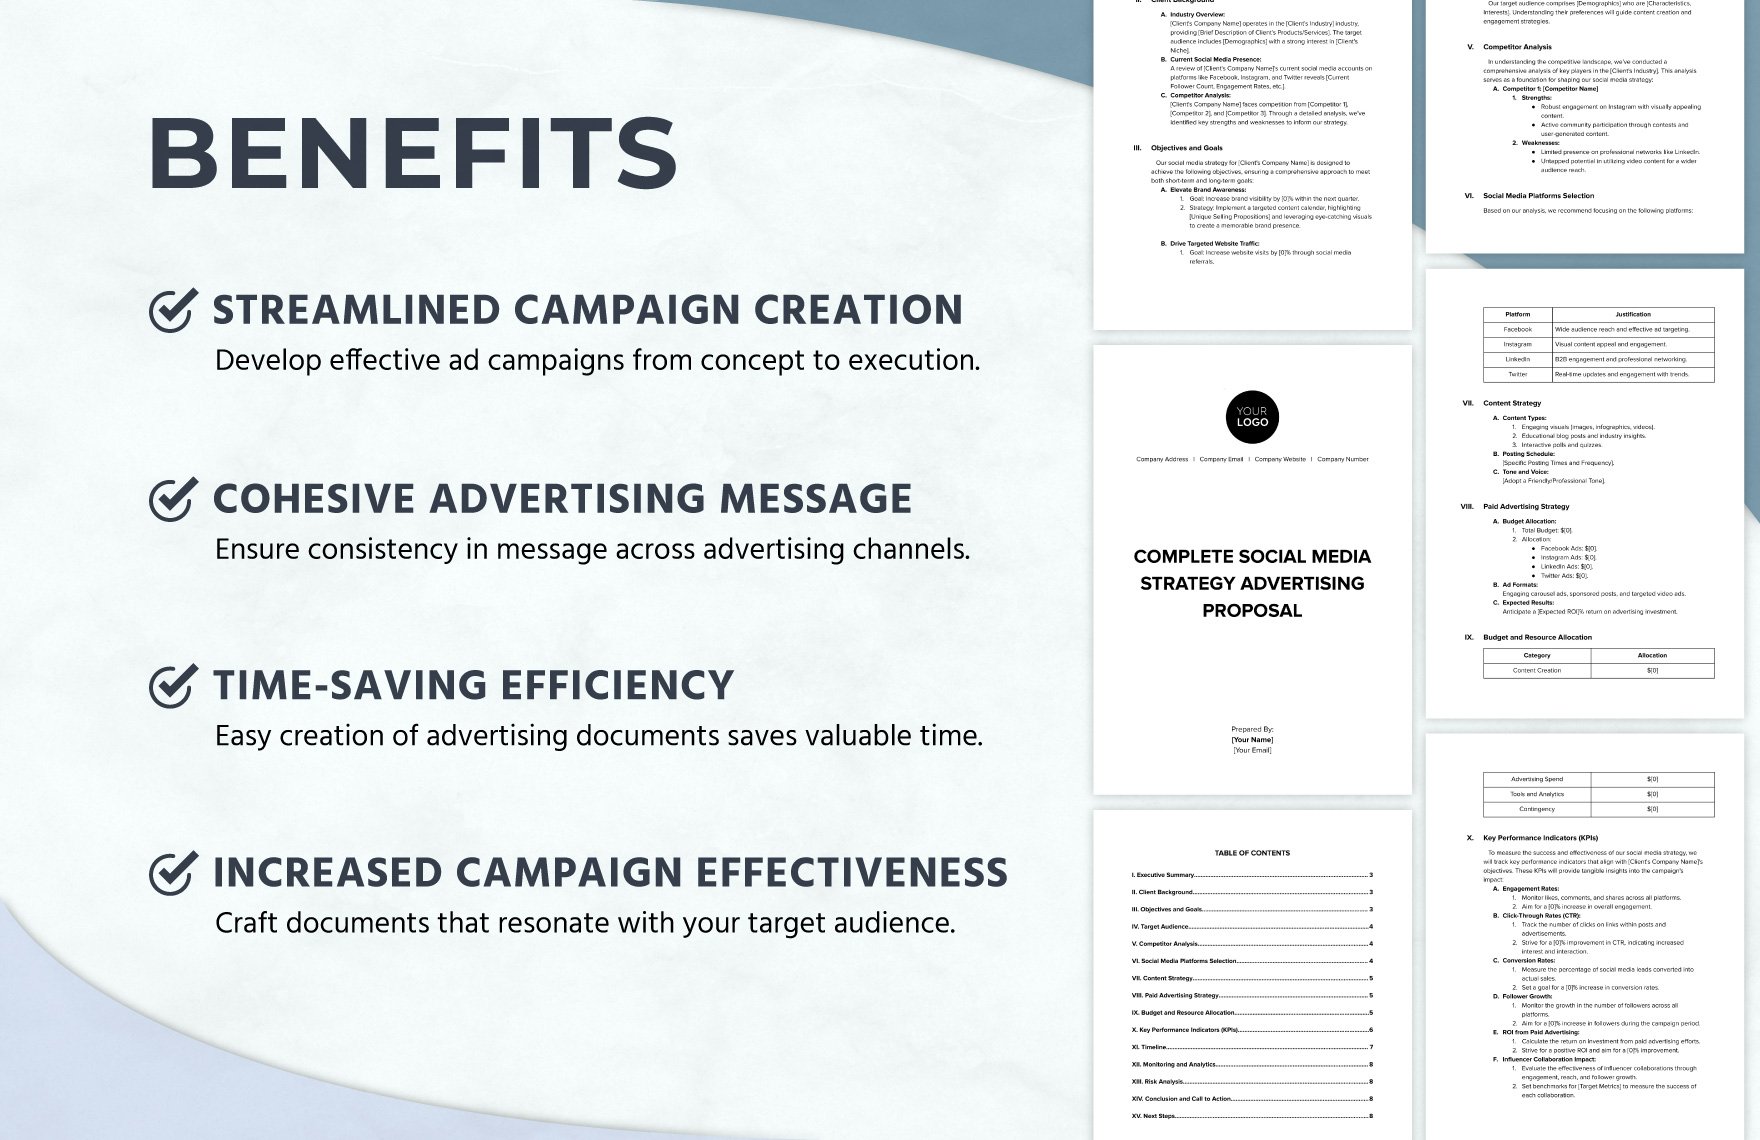 Complete Social Media Strategy Advertising Proposal Template